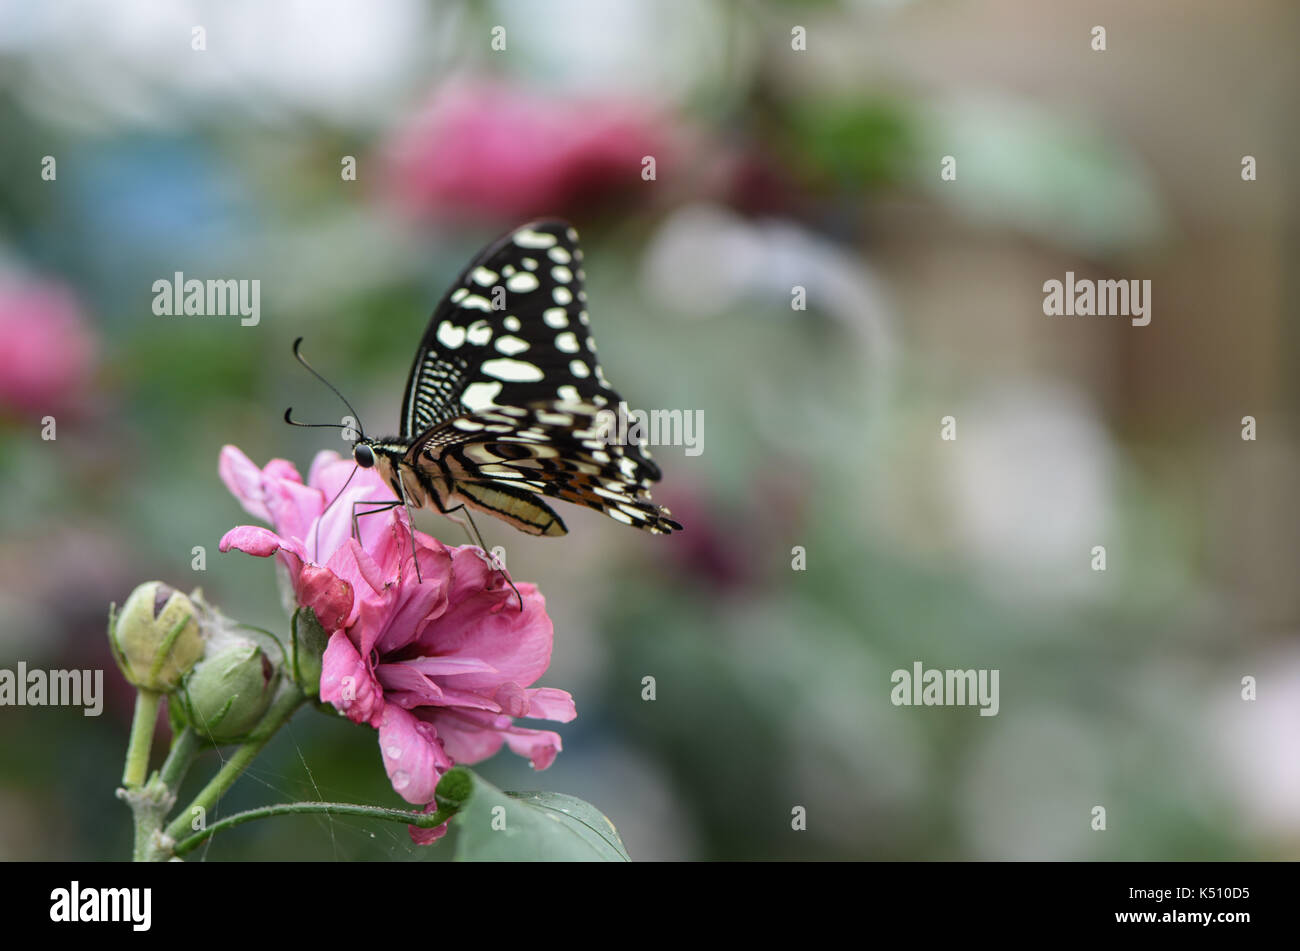 Swallowtail butterfly feeding on a pink flower, close up nature photography Stock Photo